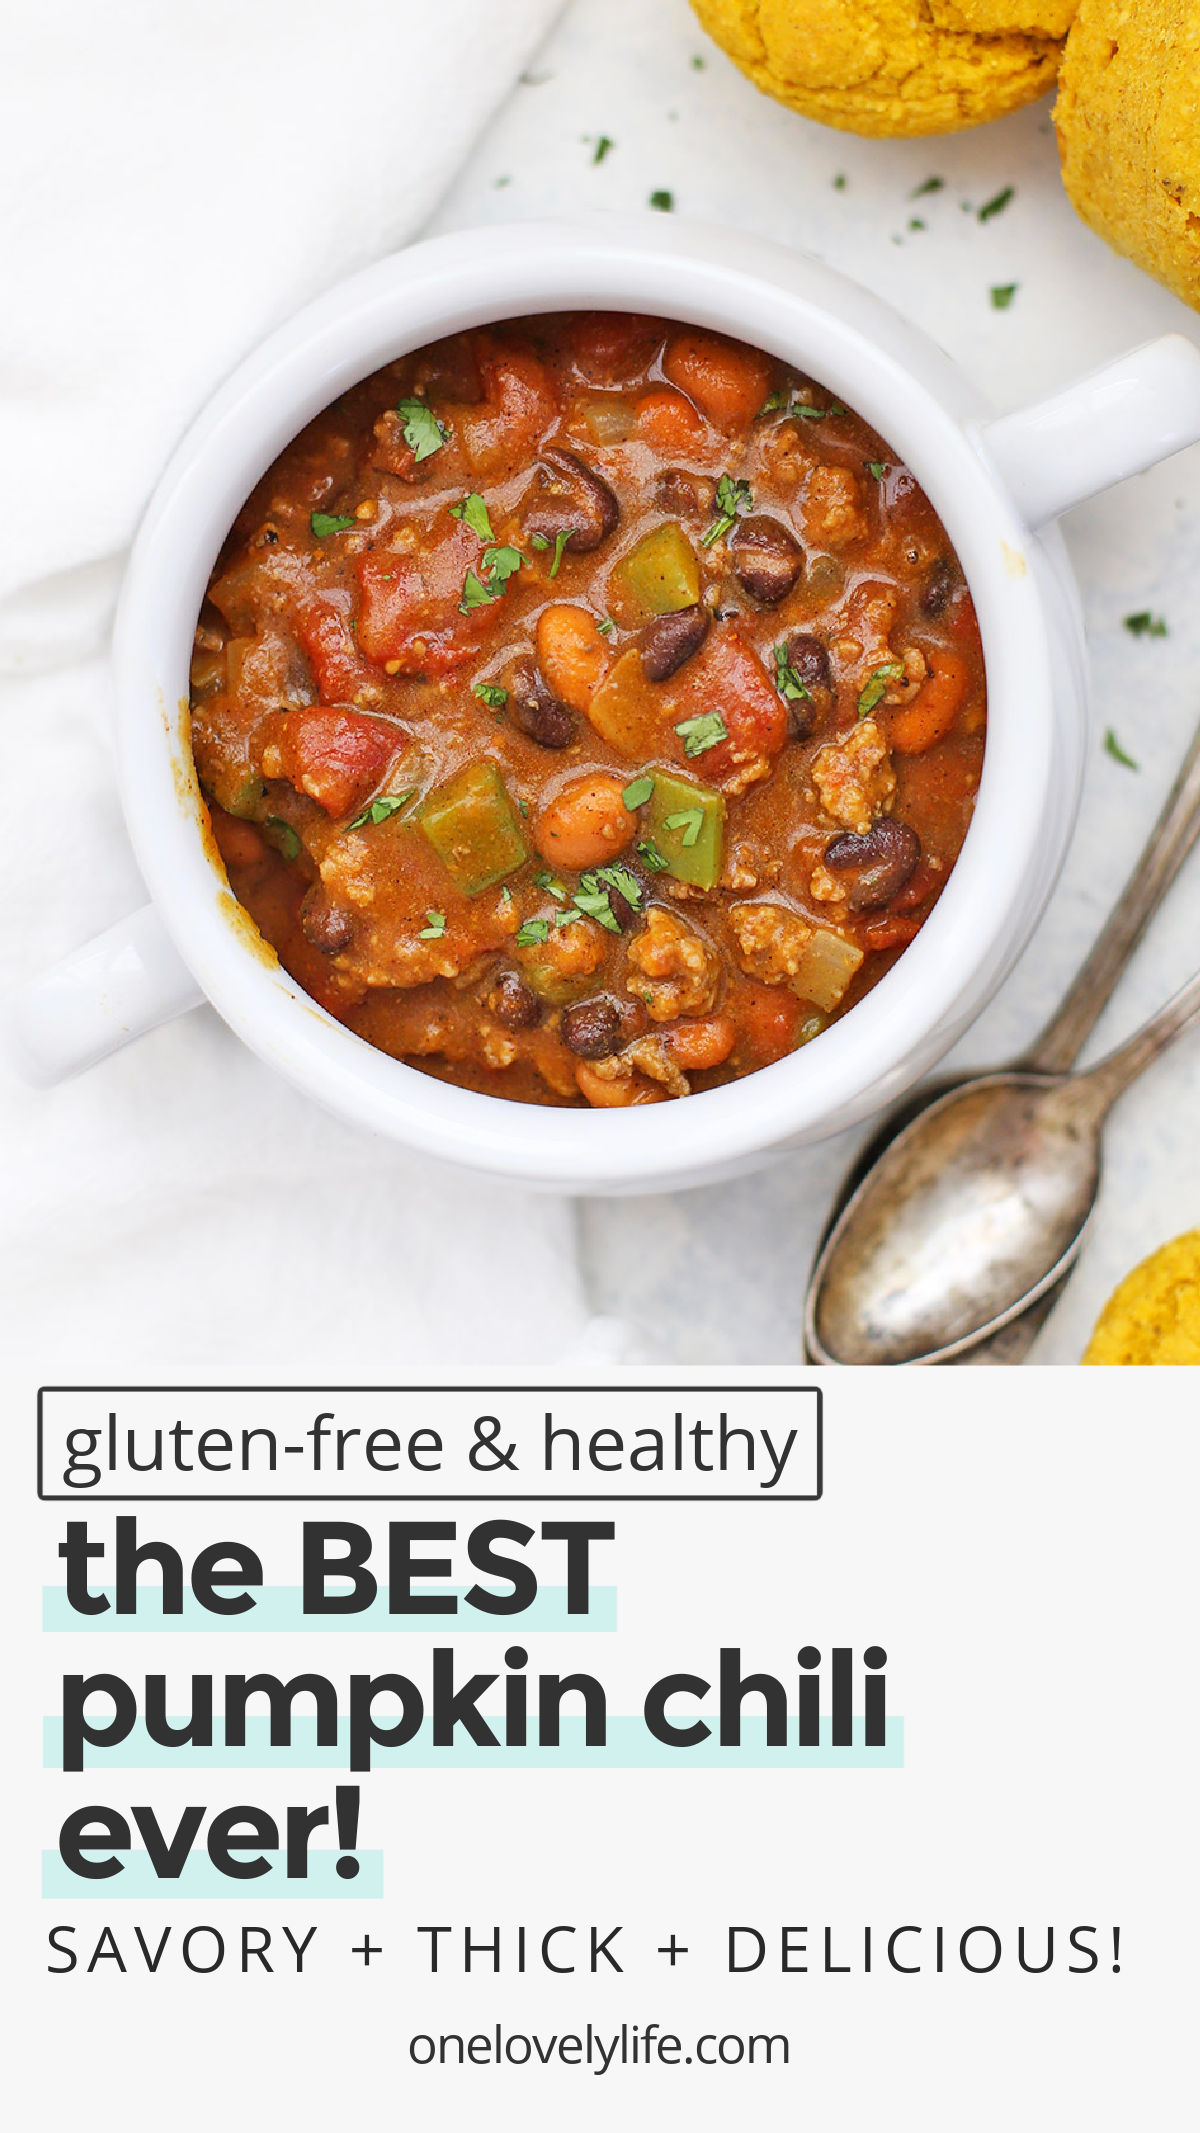 The BEST EVER Pumpkin Chili - This healthy pumpkin chili recipe might just win you a prize! (gluten-free, paleo-friendly and vegan-friendly!) // savory pumpkin recipes // pumpkin soup // how to make pumpkin chili // chili cook-off winner #pumpkin #chili #chilicookoff #glutenfree #dairyfree